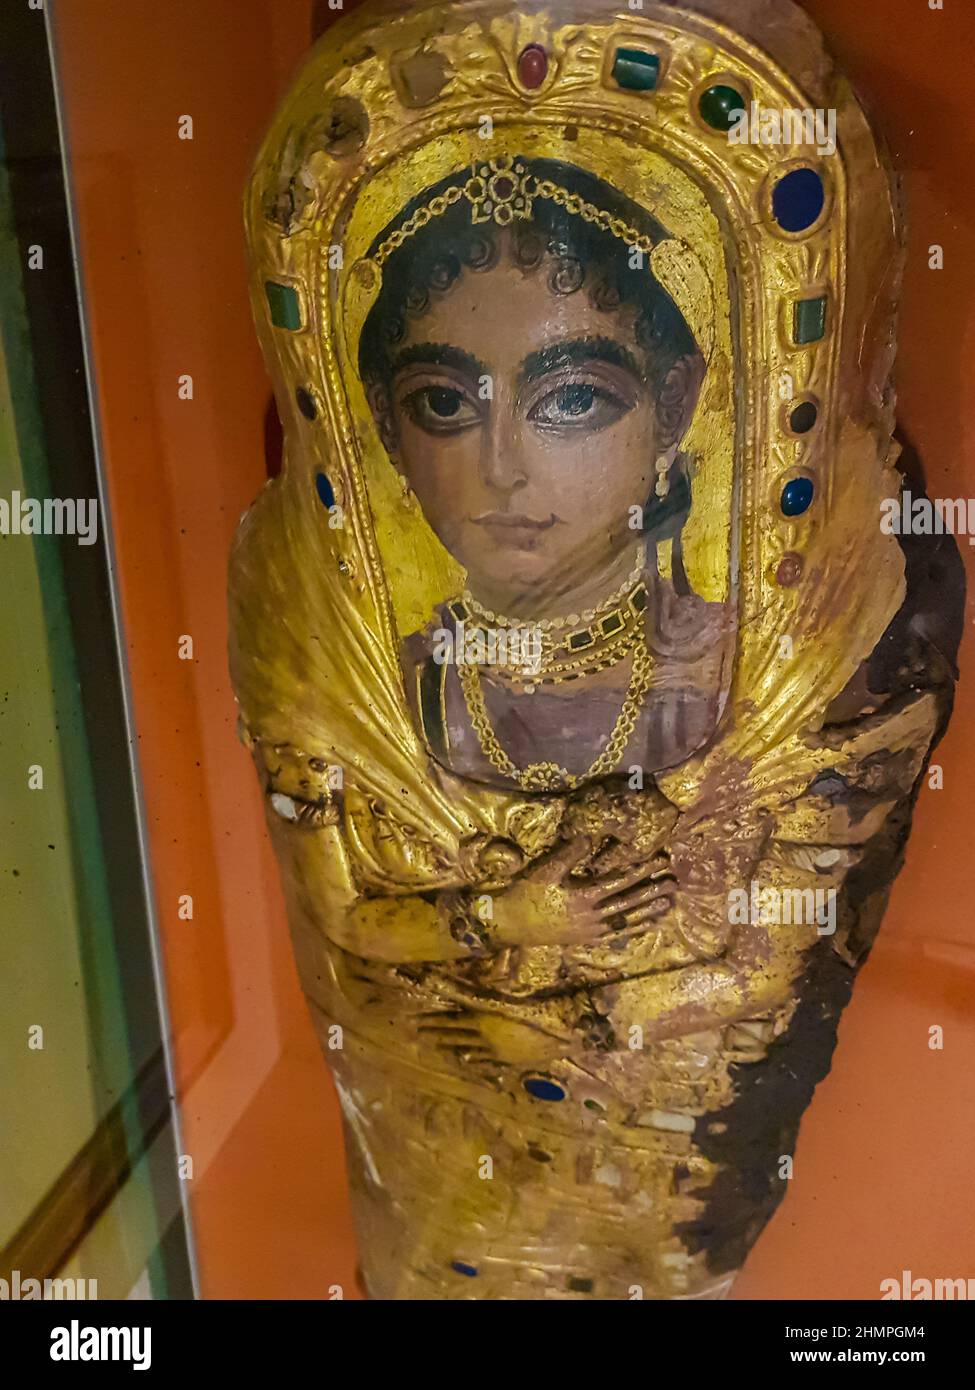 Cairo, Egypt - December 17, 2021: Female golden mummy case from Egyptian Museum in Cairo, Egypt. It is founded at 1902 and have more than 120.000 anci Stock Photo